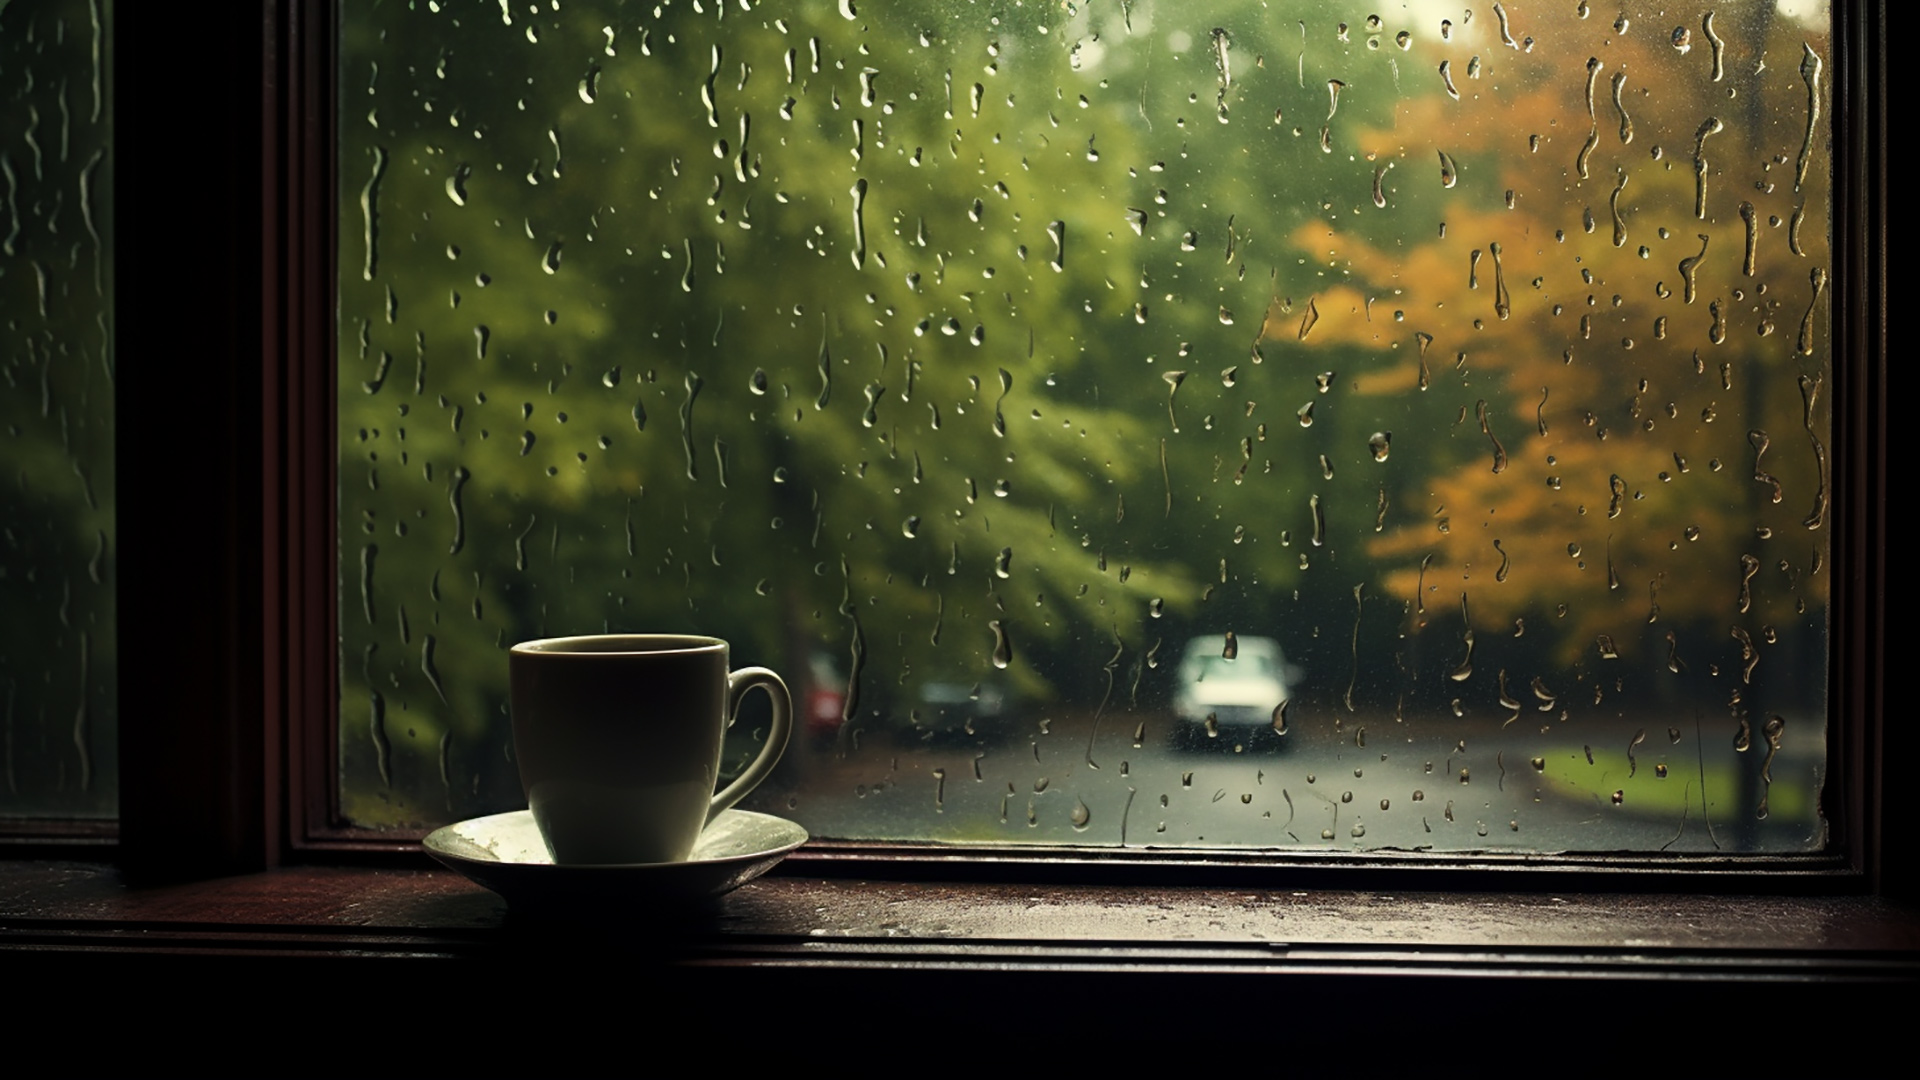 Mindful desktop moments: Rainy view wallpapers for relaxation 1920x1080